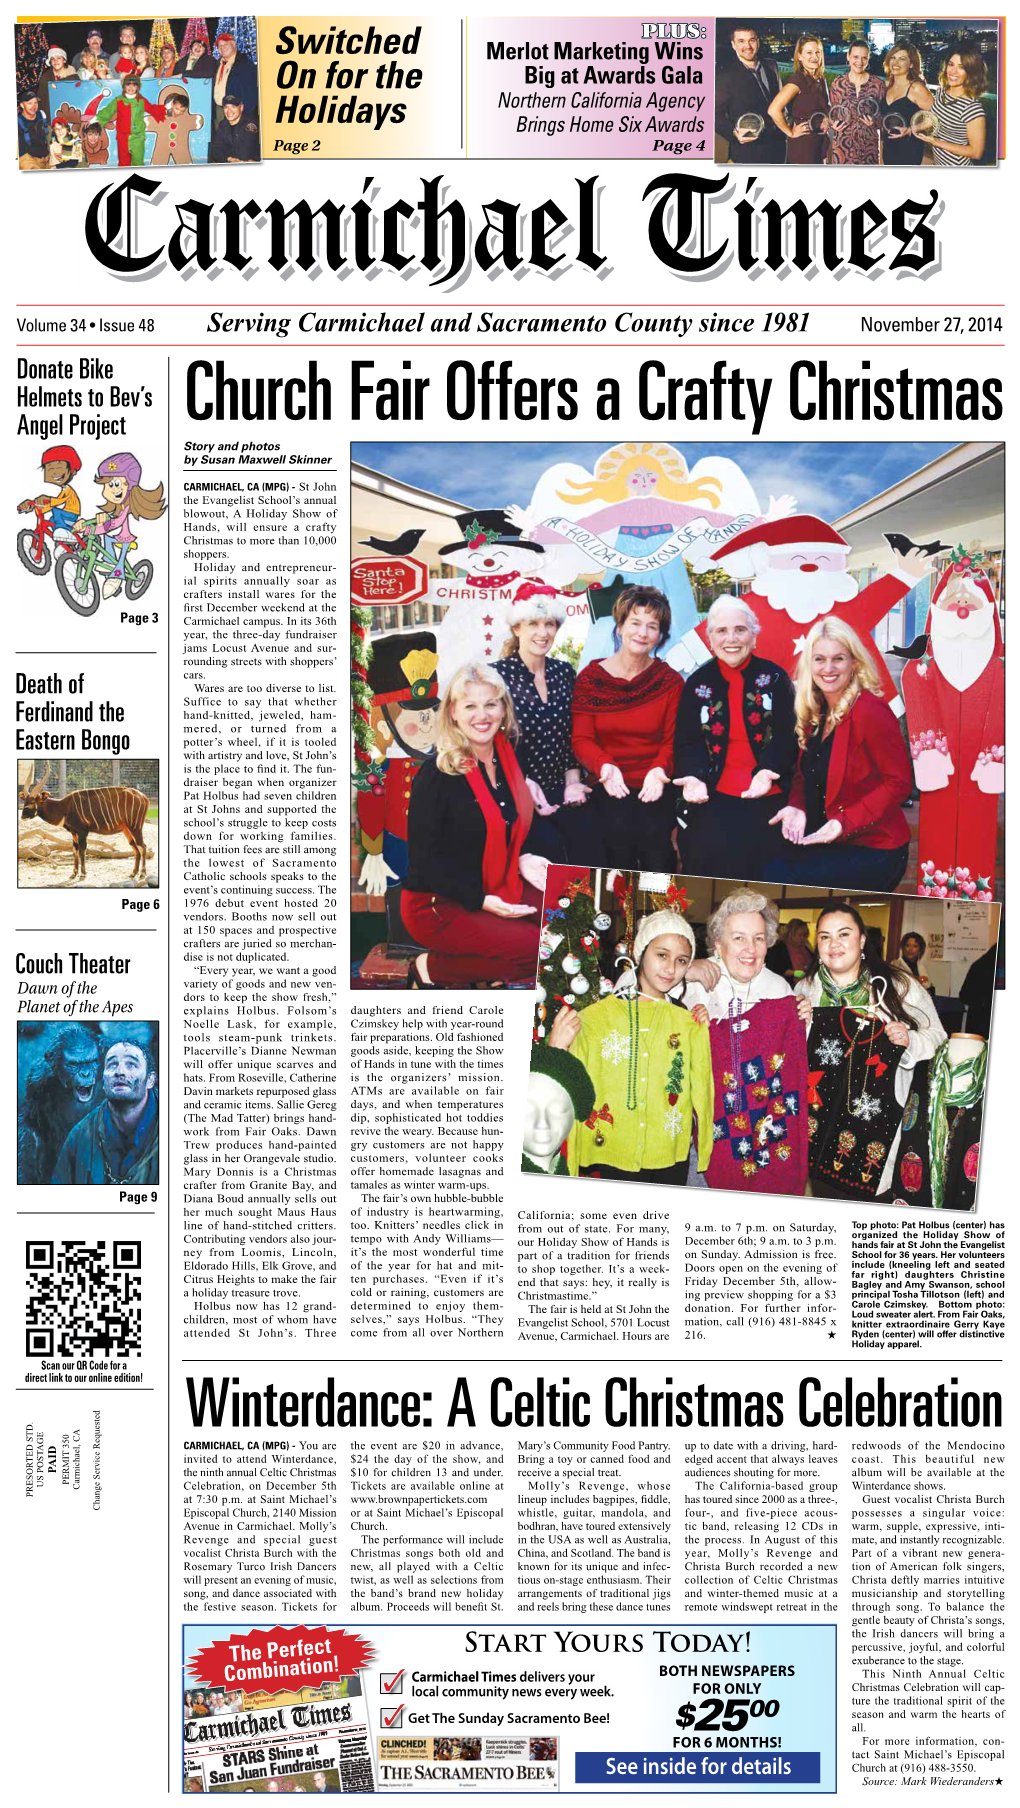 A Celtic Christmas Celebration CARMICHAEL, CA (MPG) - You Are the Event Are $20 in Advance, Mary’S Community Food Pantry